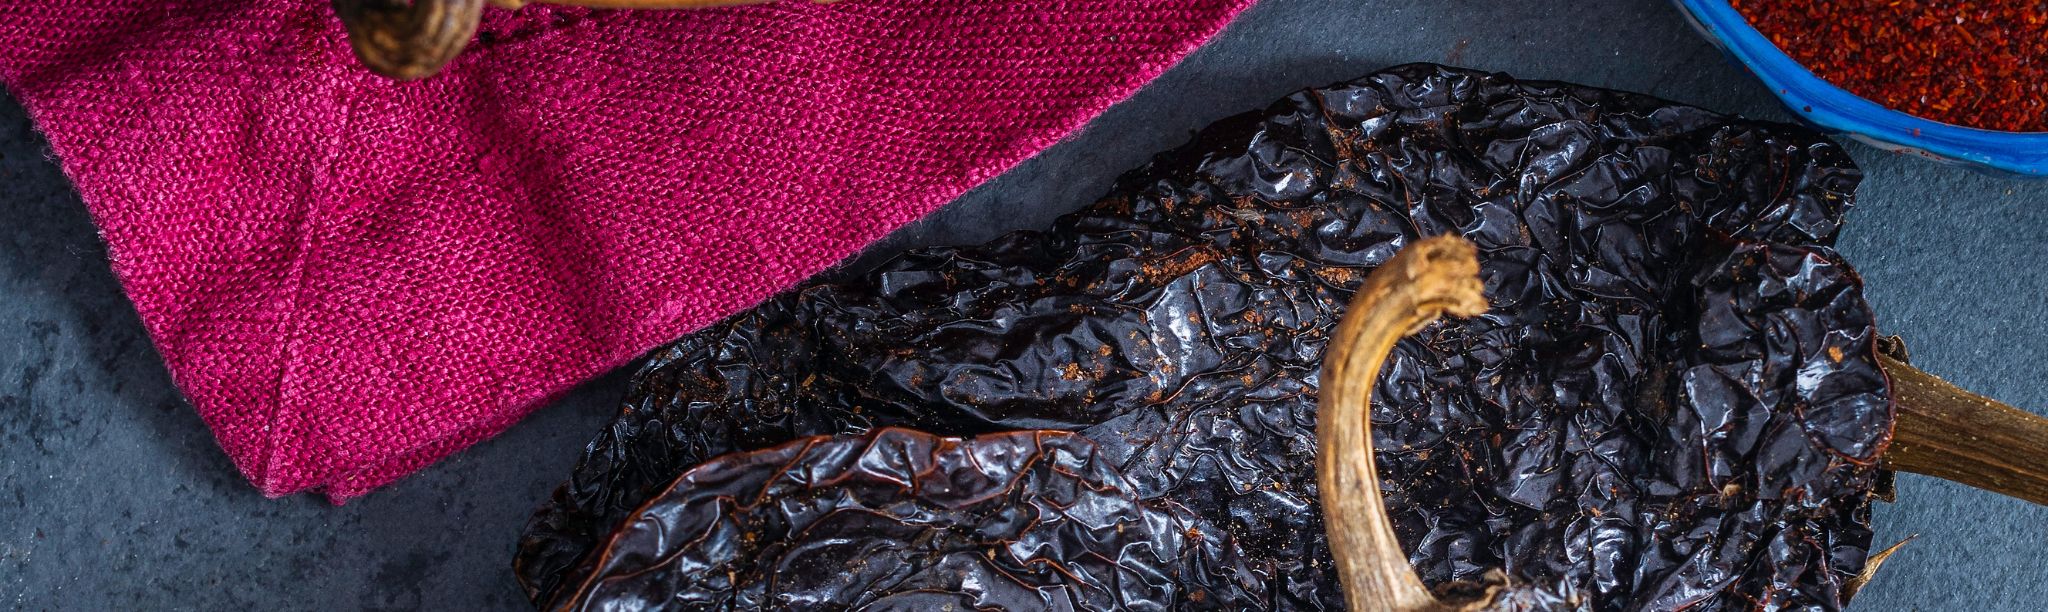 what is difference between ancho pepper and regular pepper?